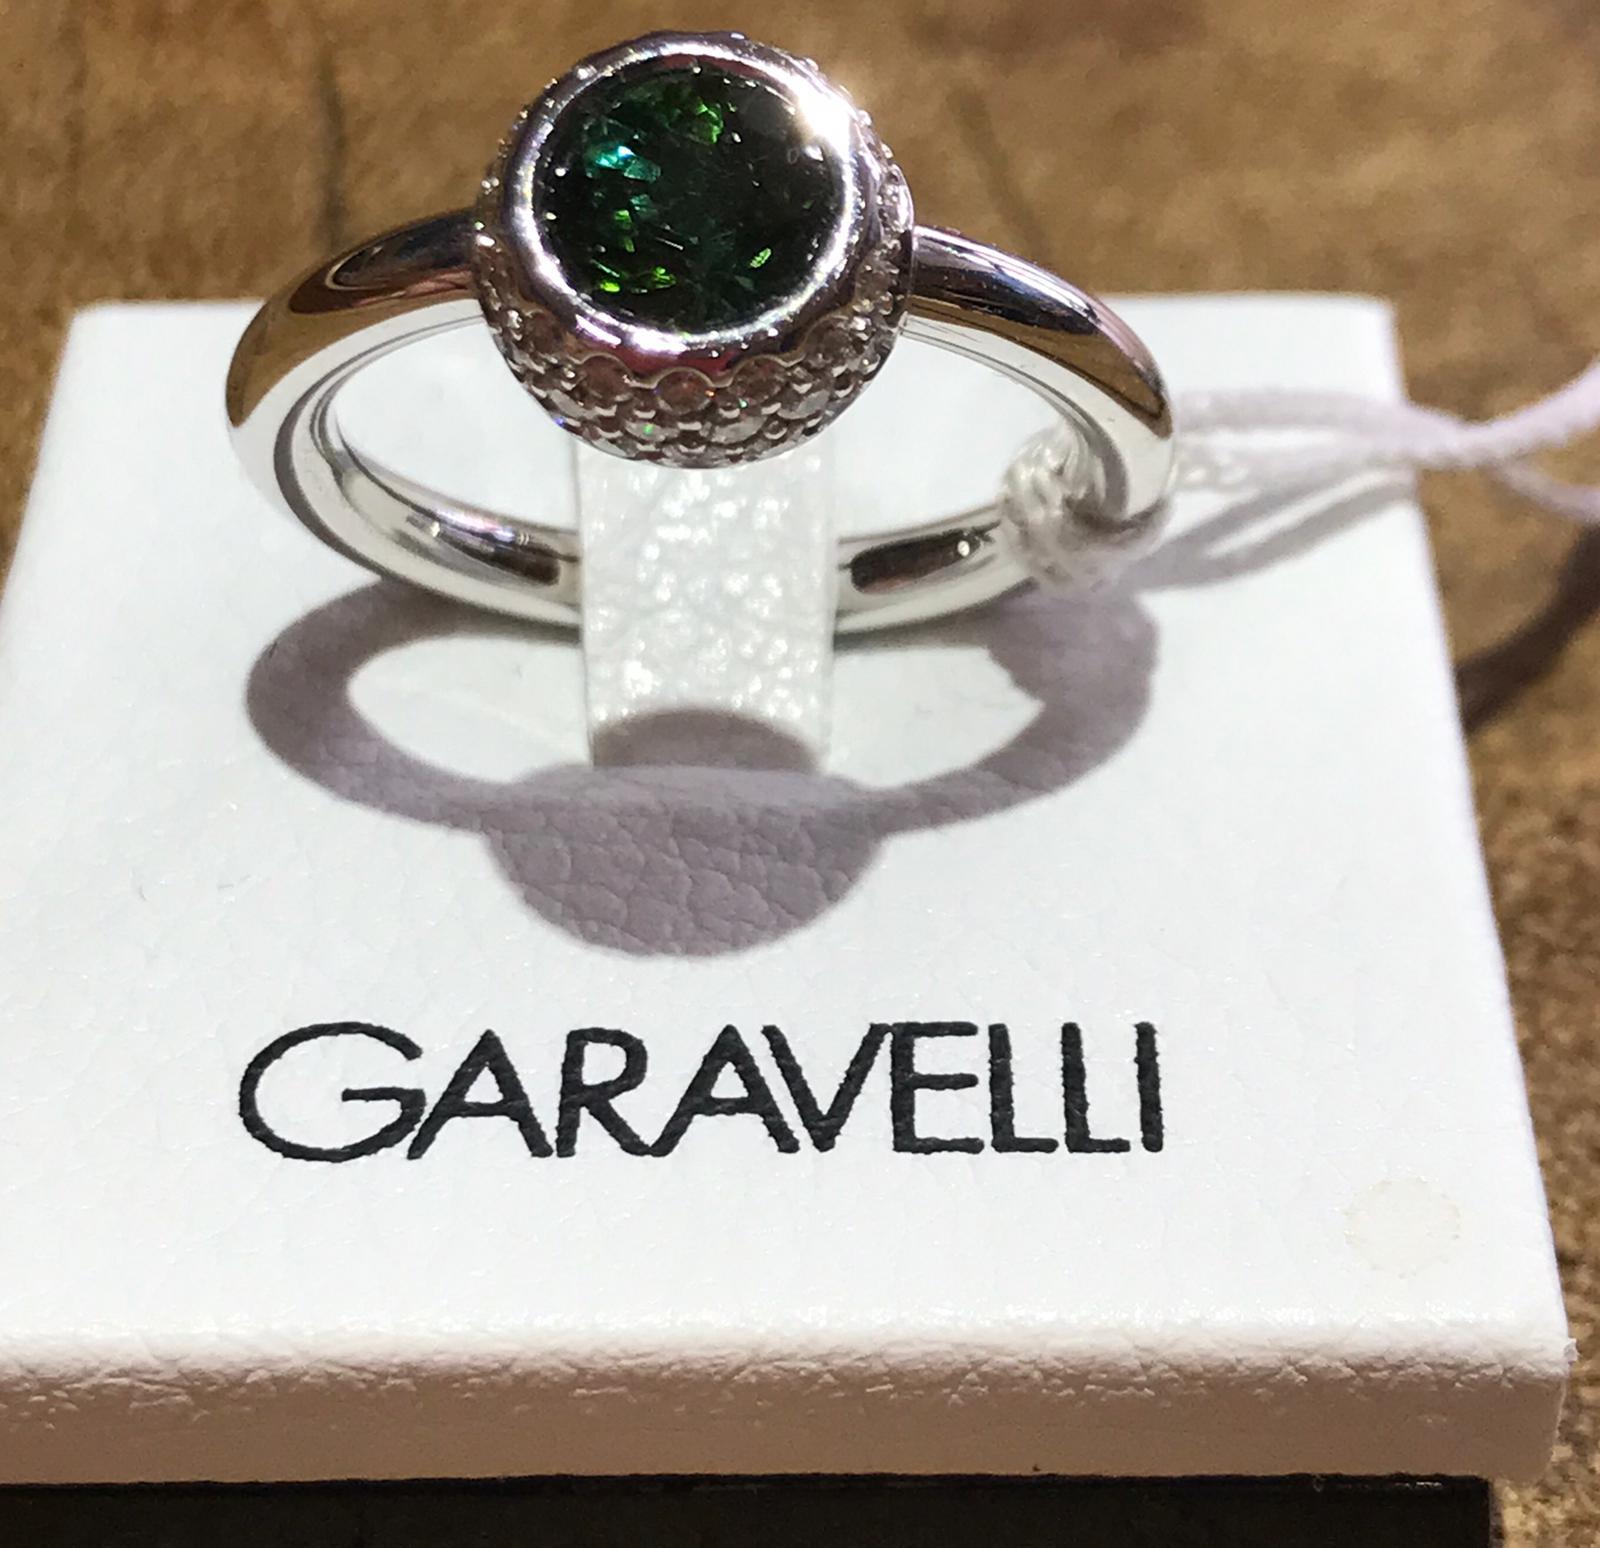 Garavelli 18 Karat White Gold Green Tourmaline White Diamond
Giotto Collection Ring
A beautiful round Green Tourmaline surrounded by white diamonds pavè on the side of the head of the ring 
Green Tourmaline carat weight 0,94 diameter mm 6
18KT GOLD 